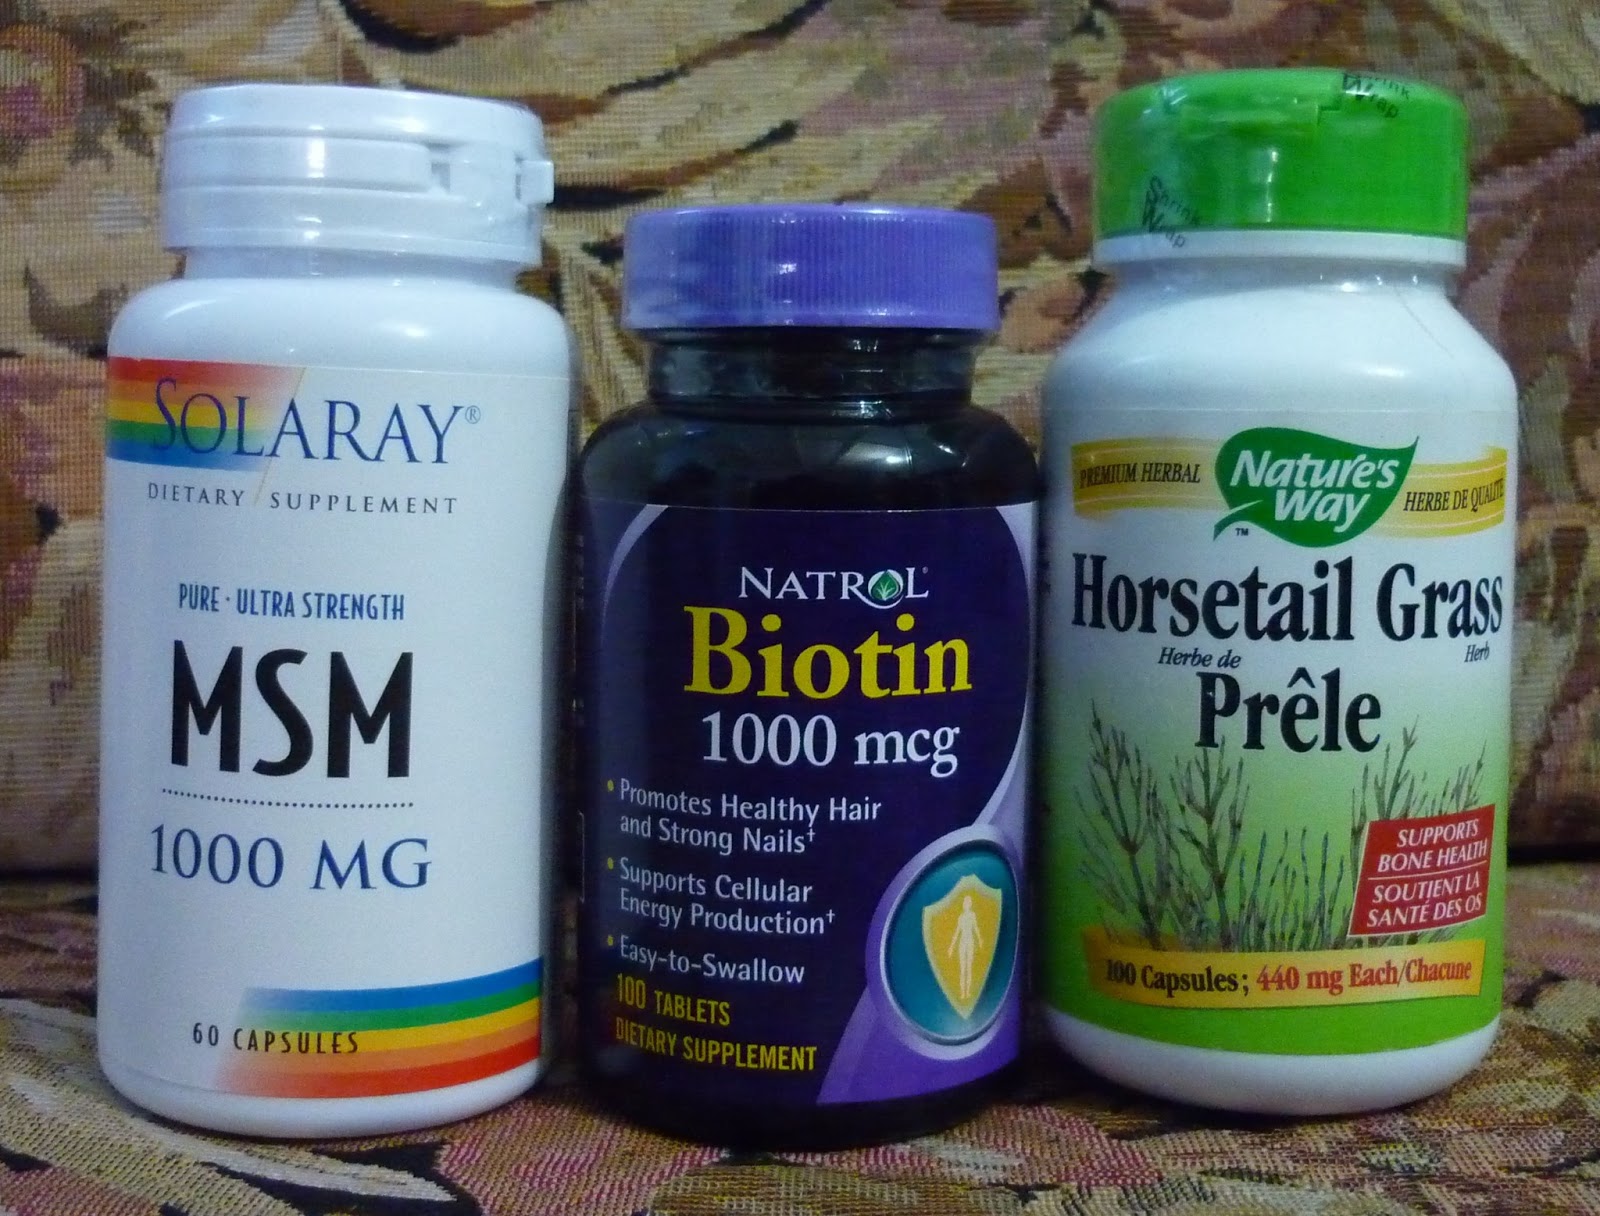 JJSKARLETTE A Few Supplements That May Improve Hair Growth